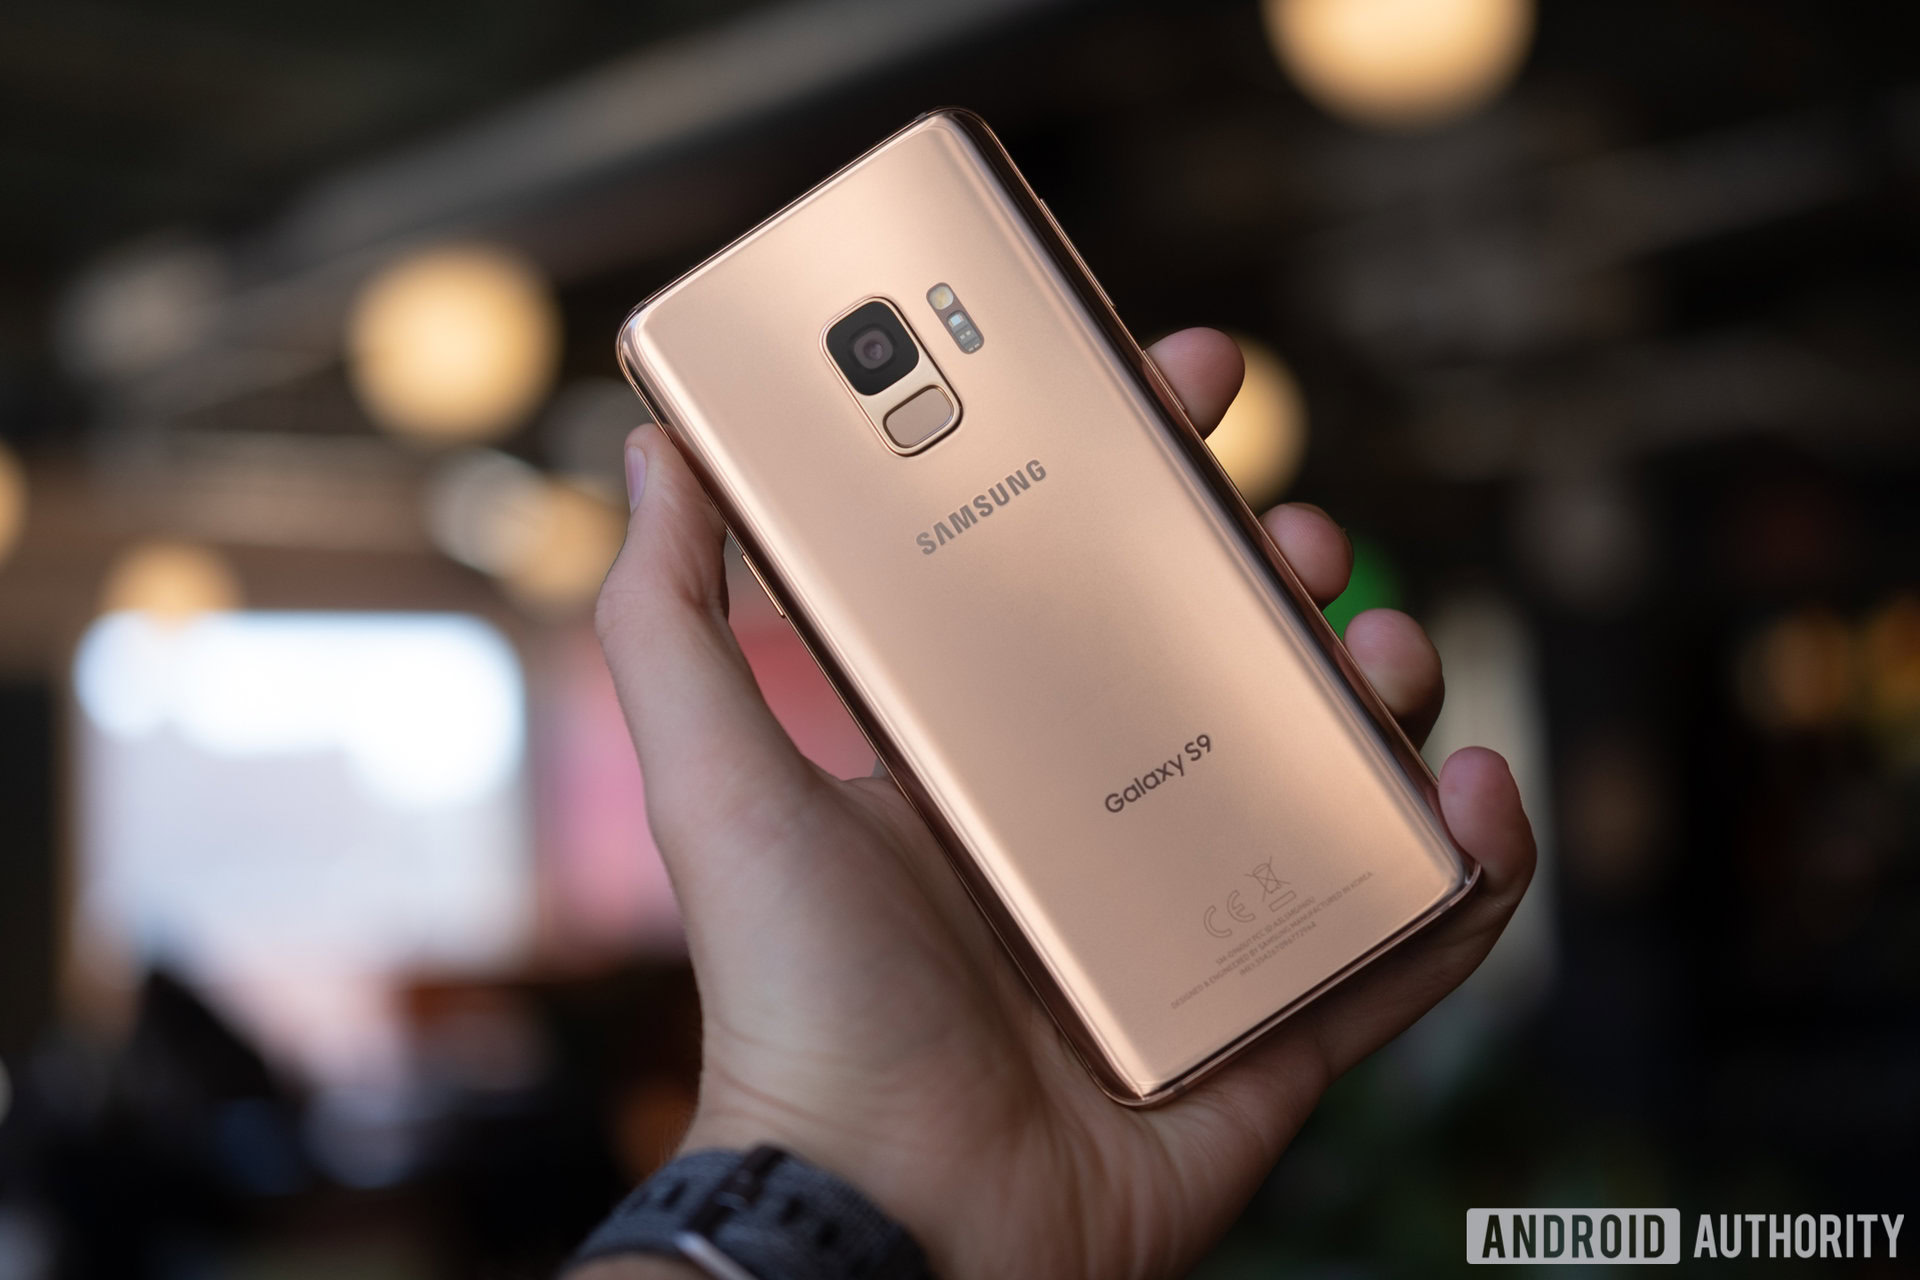 Samsung ends Android updates for Galaxy S9 series - 9to5Google